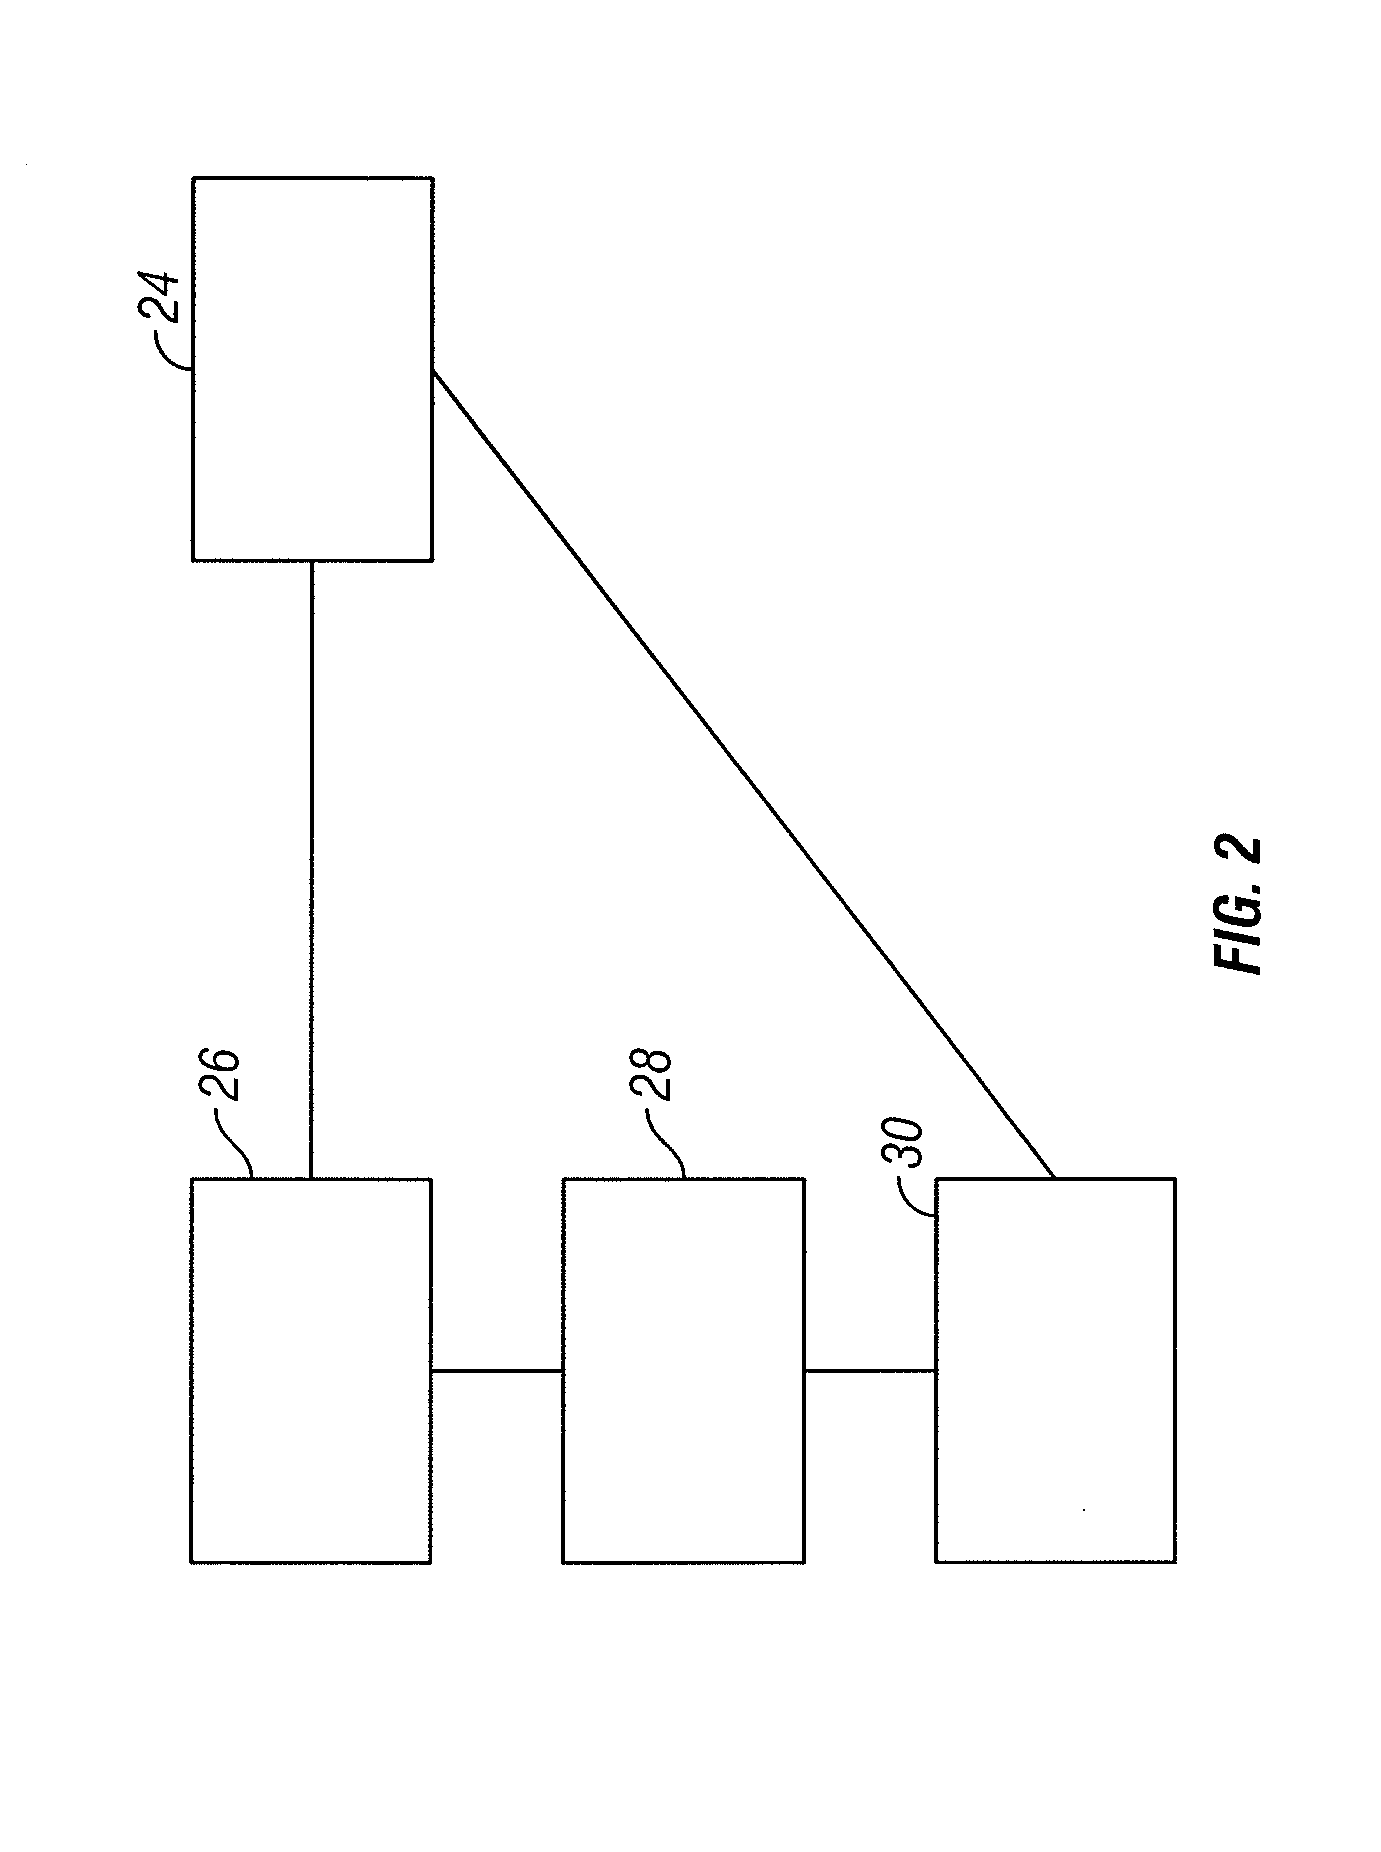 Methods using activity manager for monitoring user activity